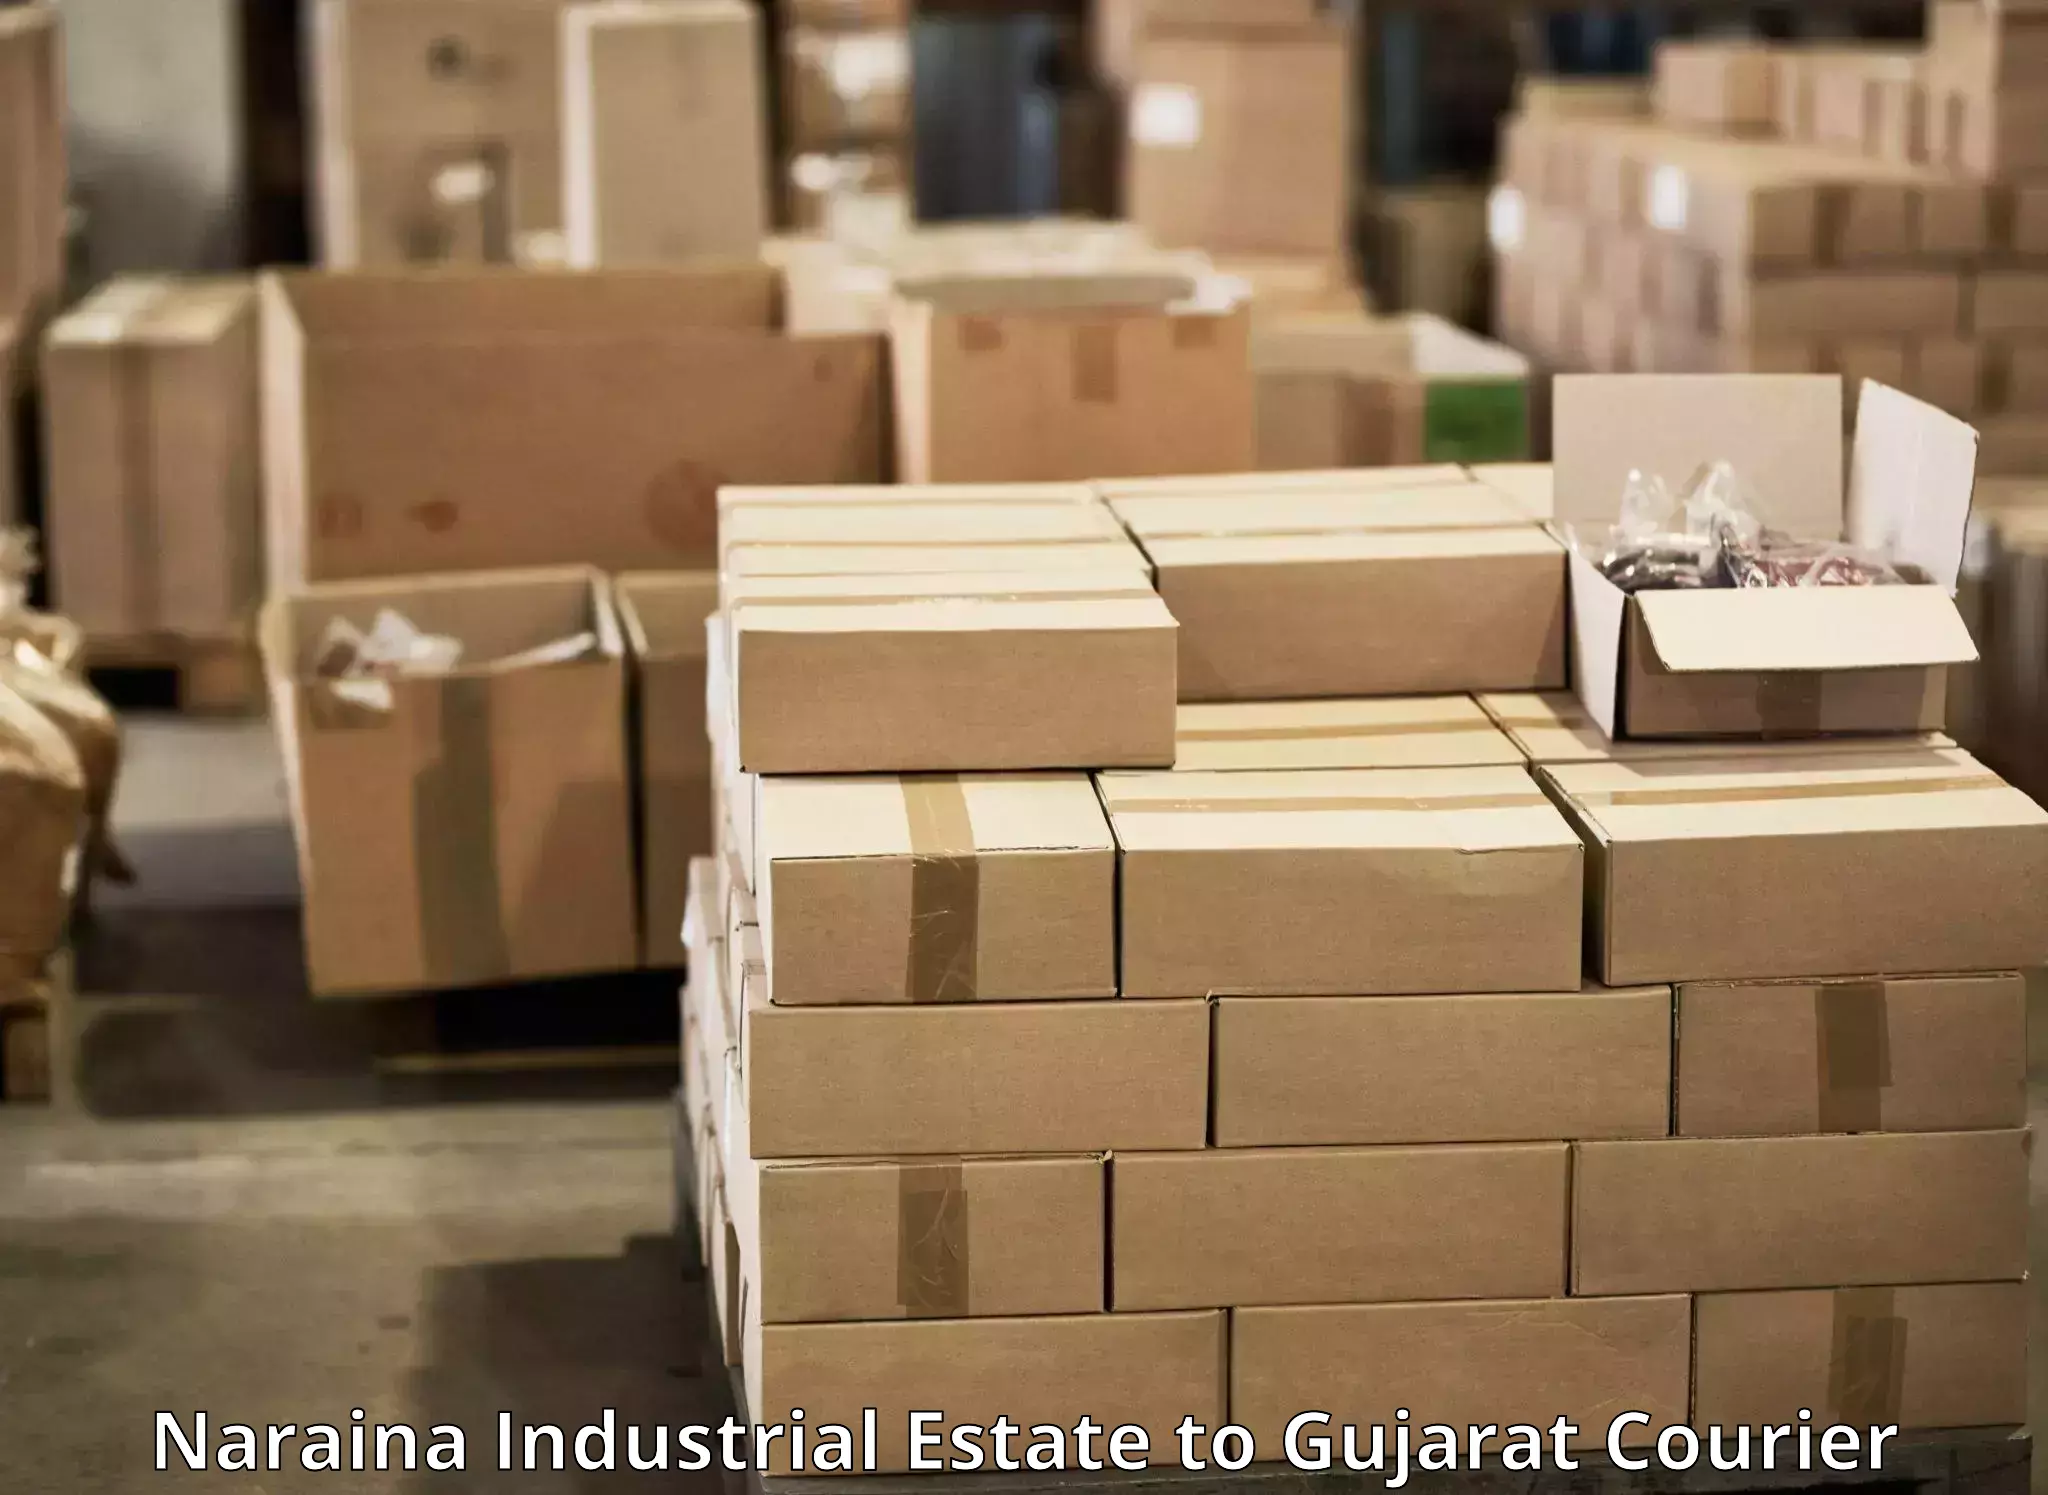 Sustainable shipping practices Naraina Industrial Estate to Gujarat